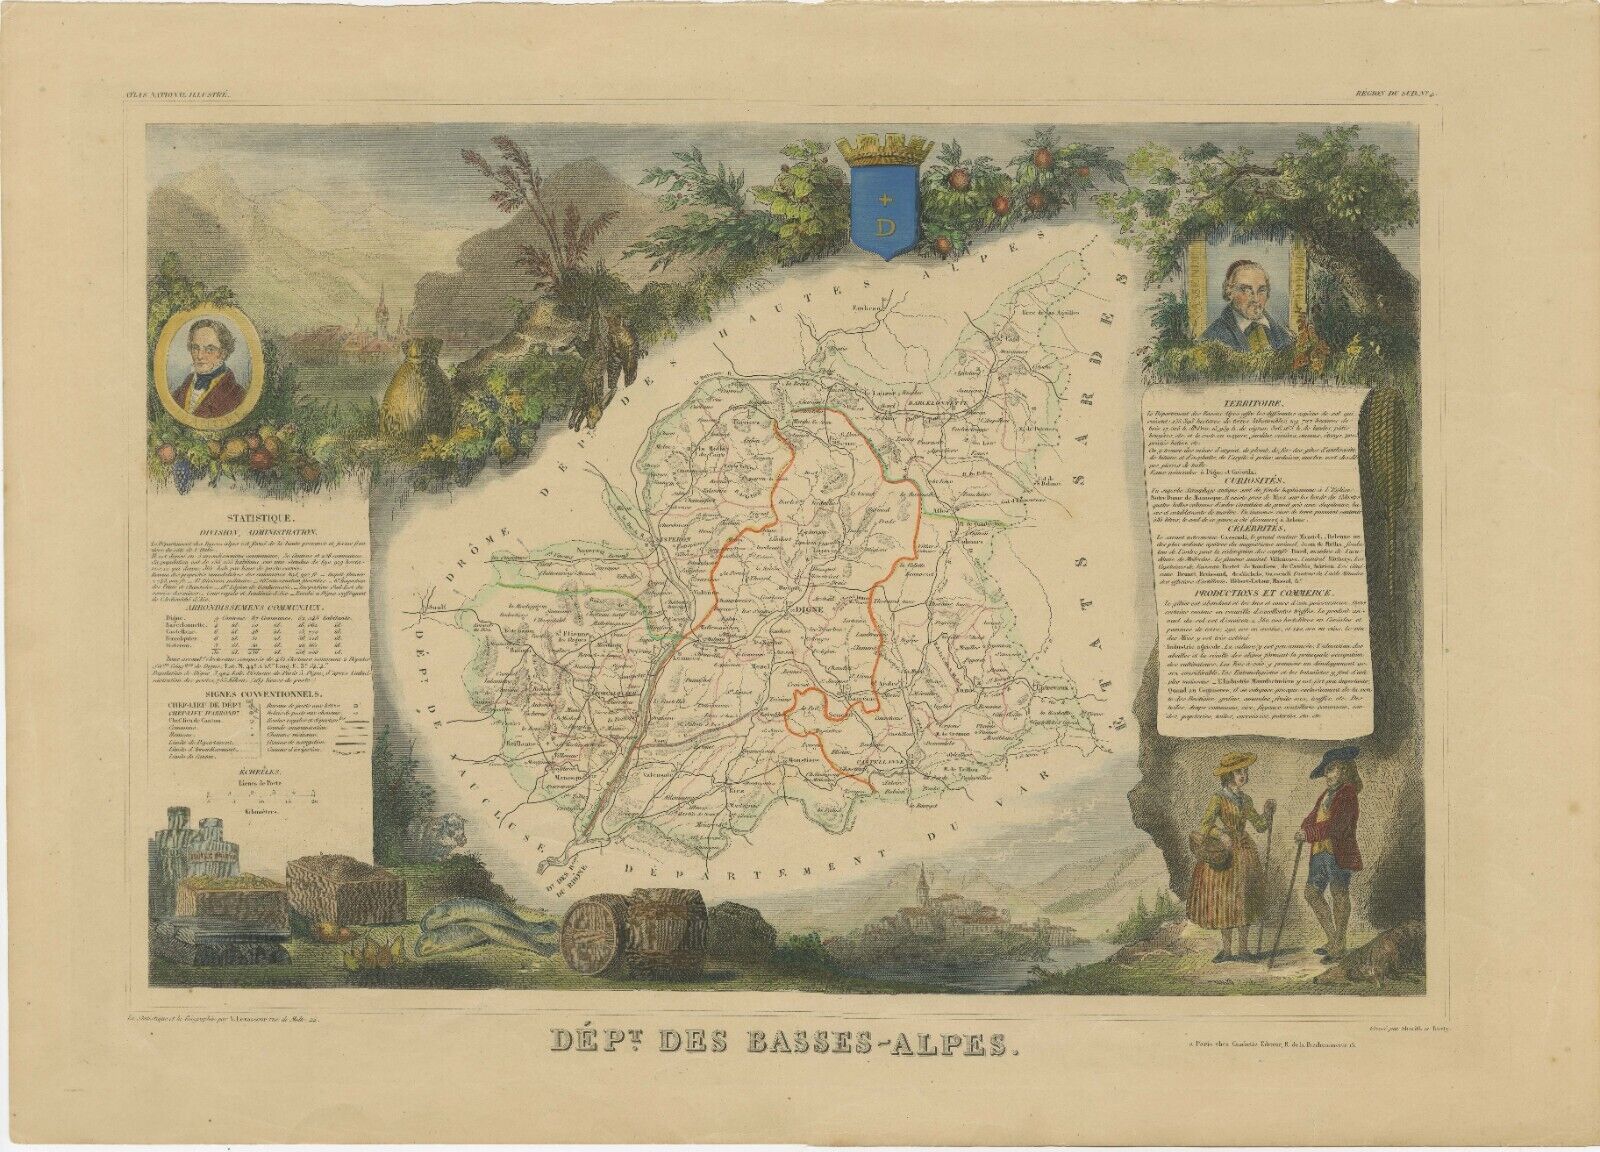 Hand Colored Antique Map of the Department of Basses-Alpes, France